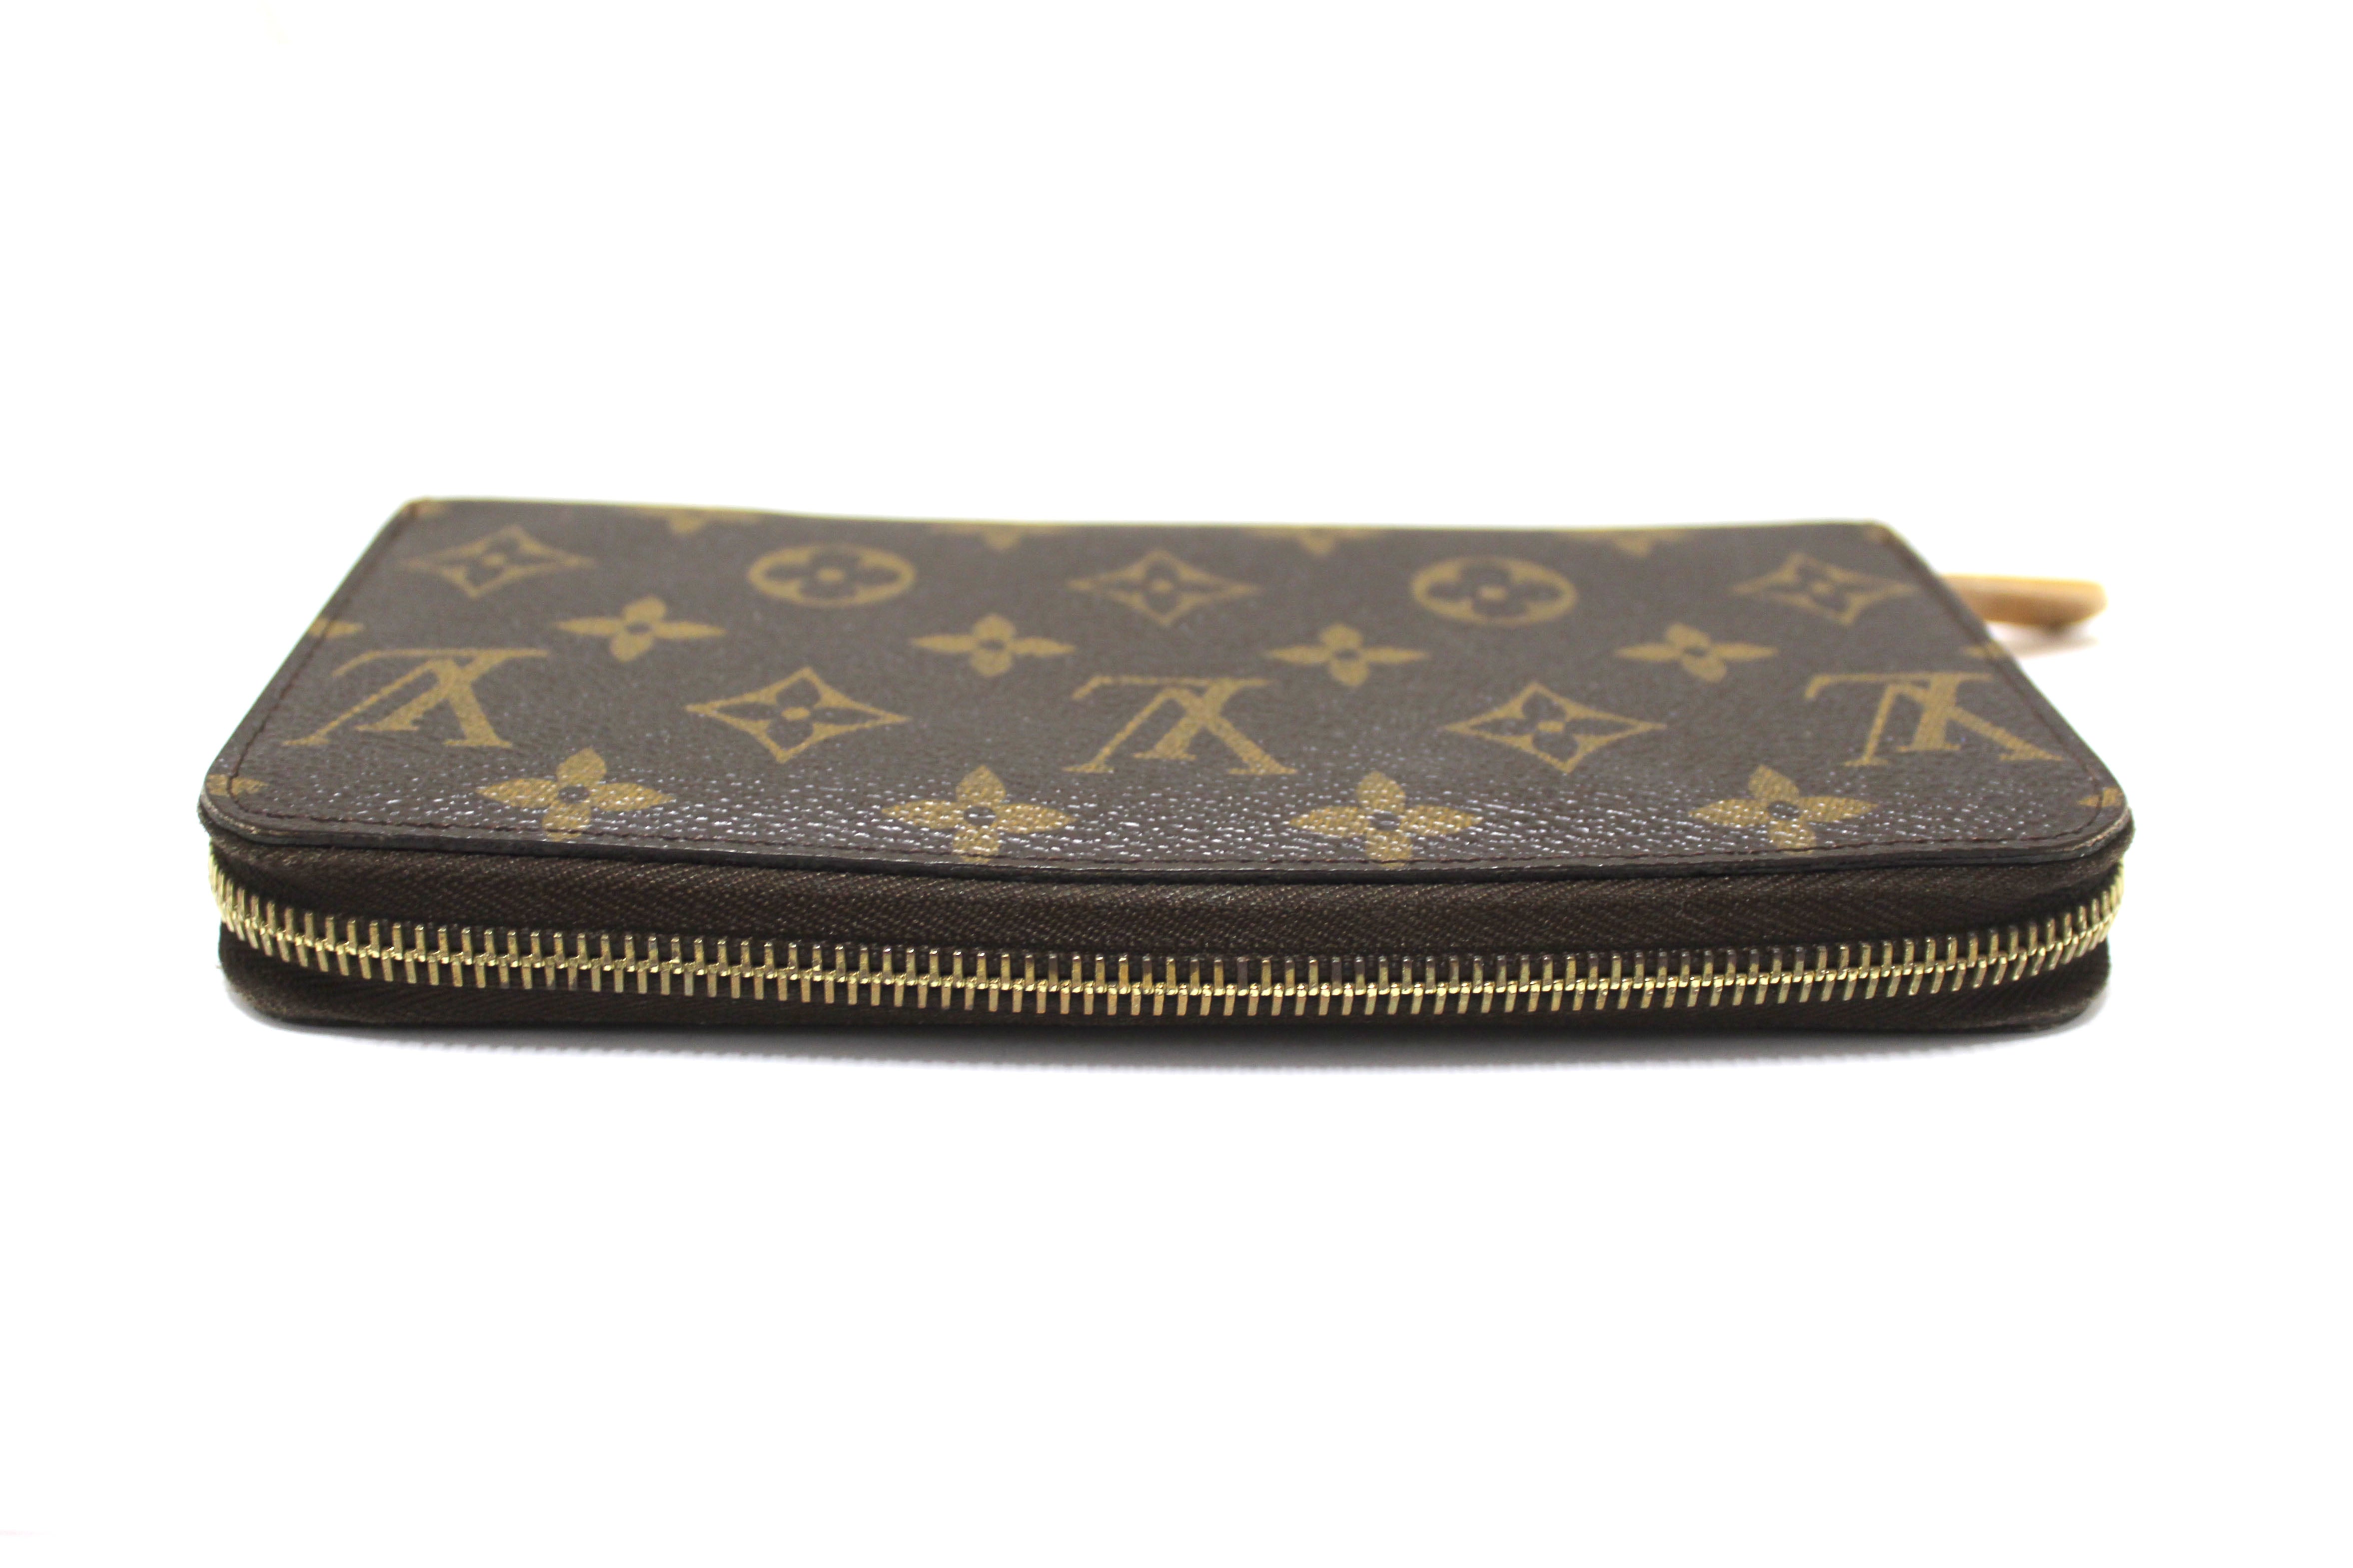 Louis Vuitton - Authenticated Zippy Wallet - Leather Brown for Women, Good Condition